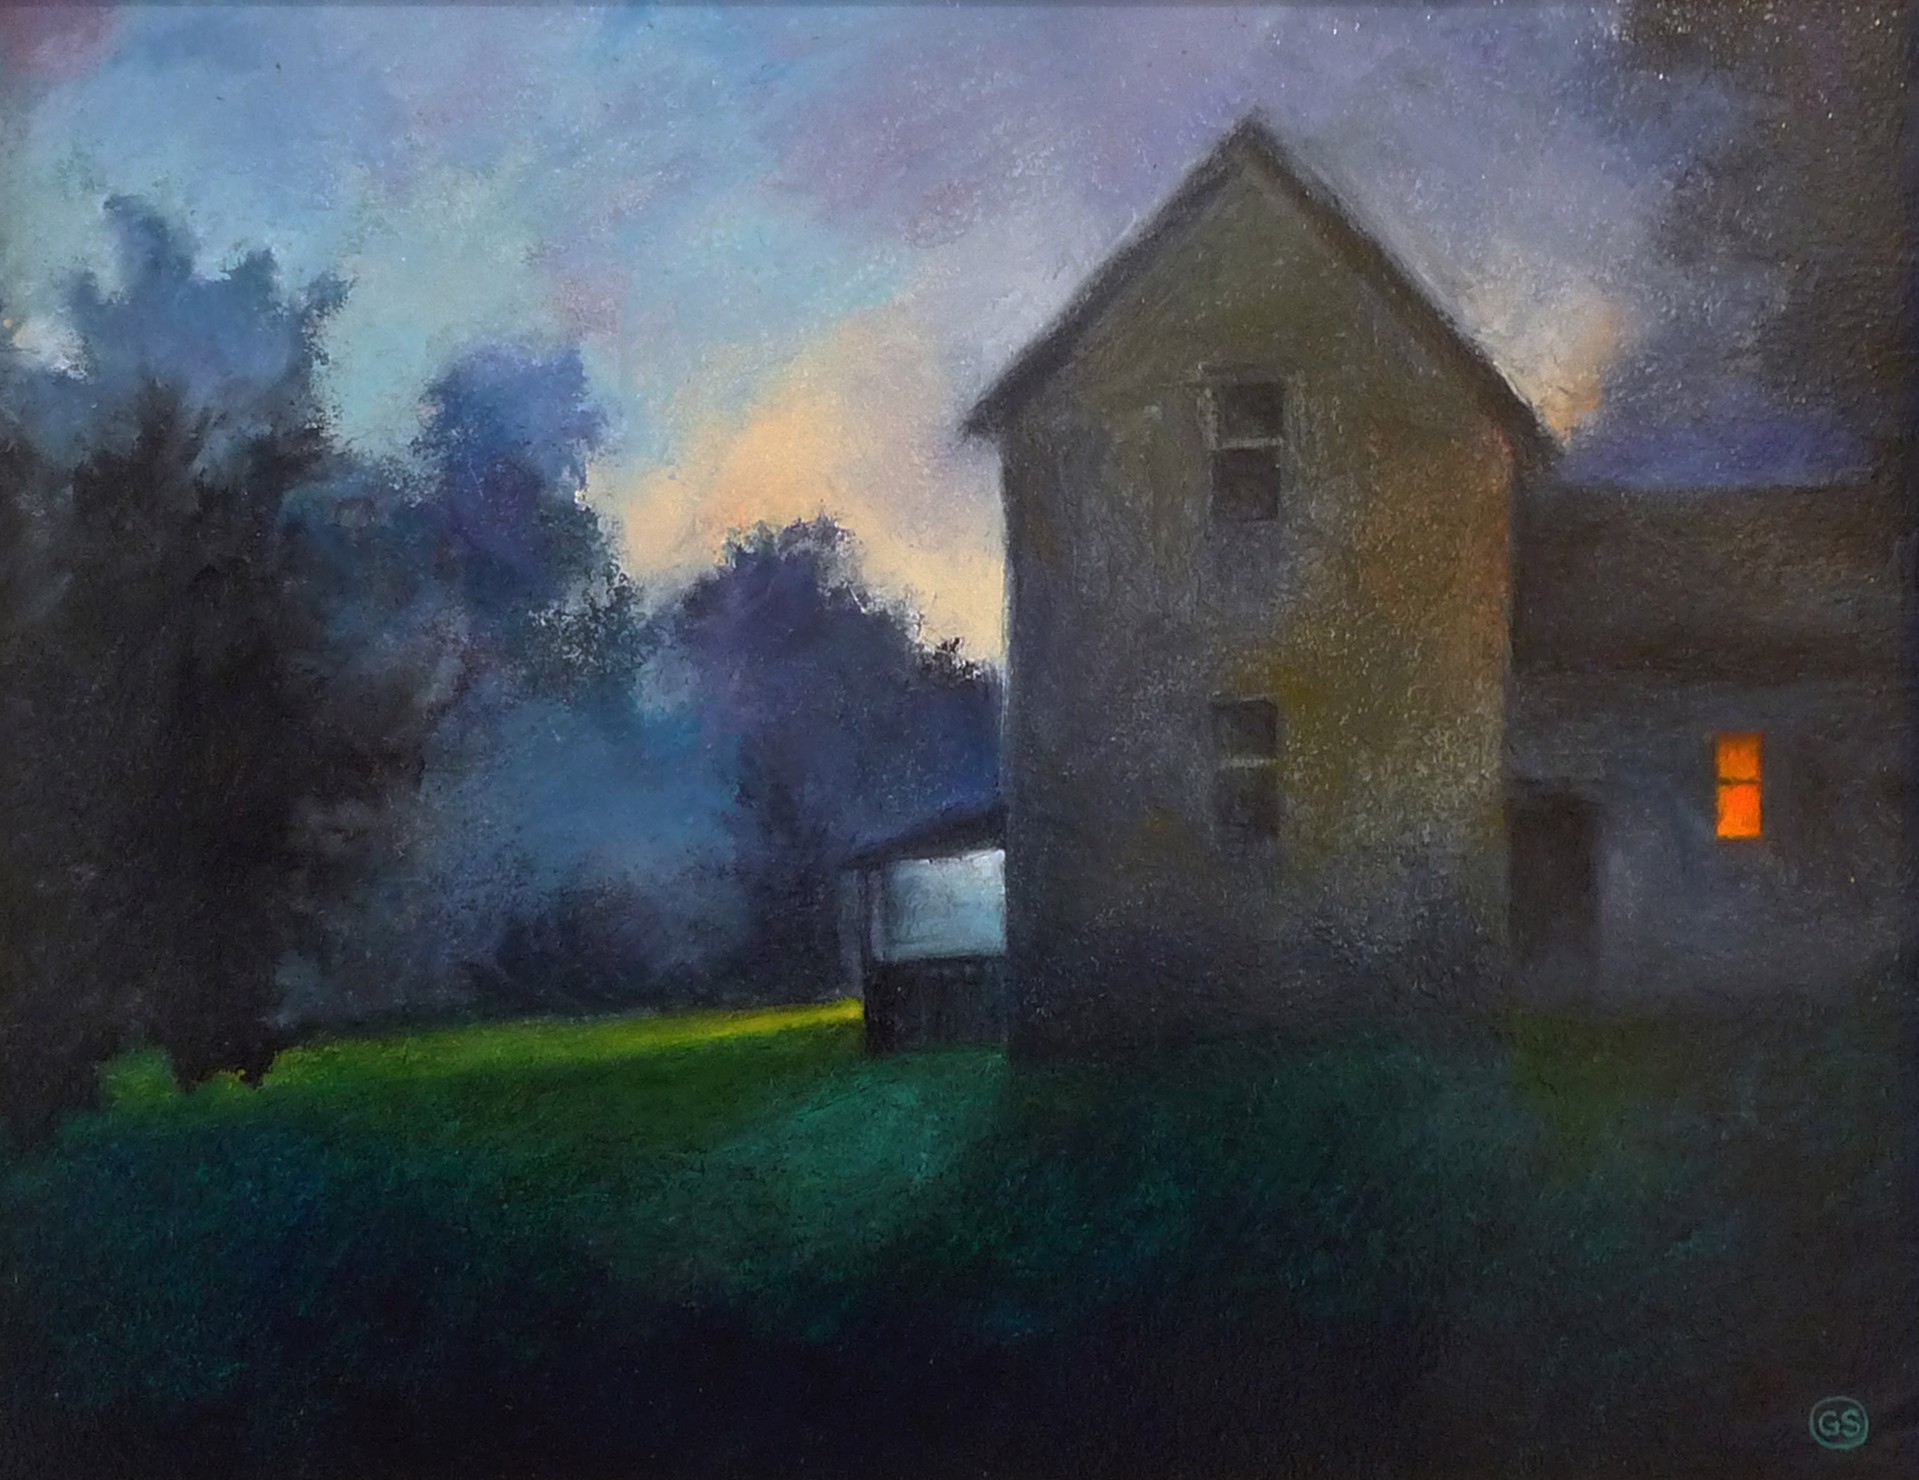 Porchlight at Twilight by Gregory Schulte